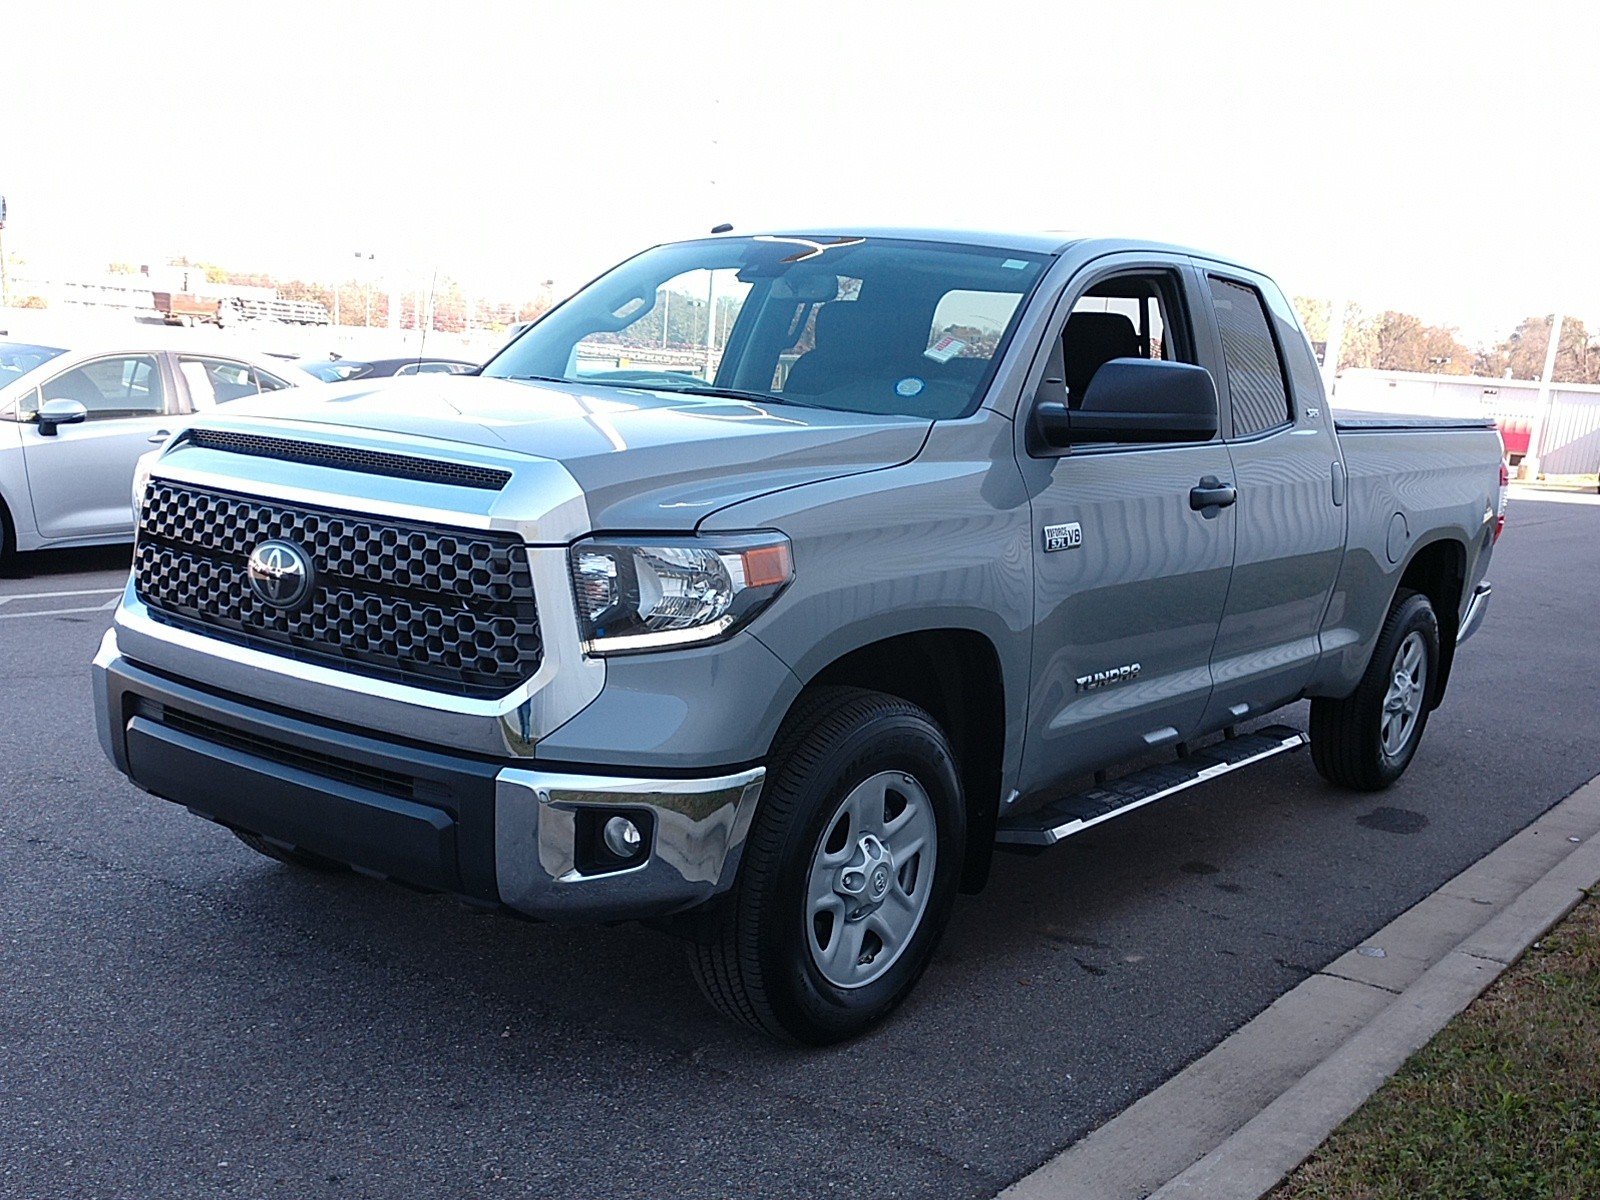 Pre-Owned 2018 Toyota Tundra SR5 Double Cab in Birmingham #856875A